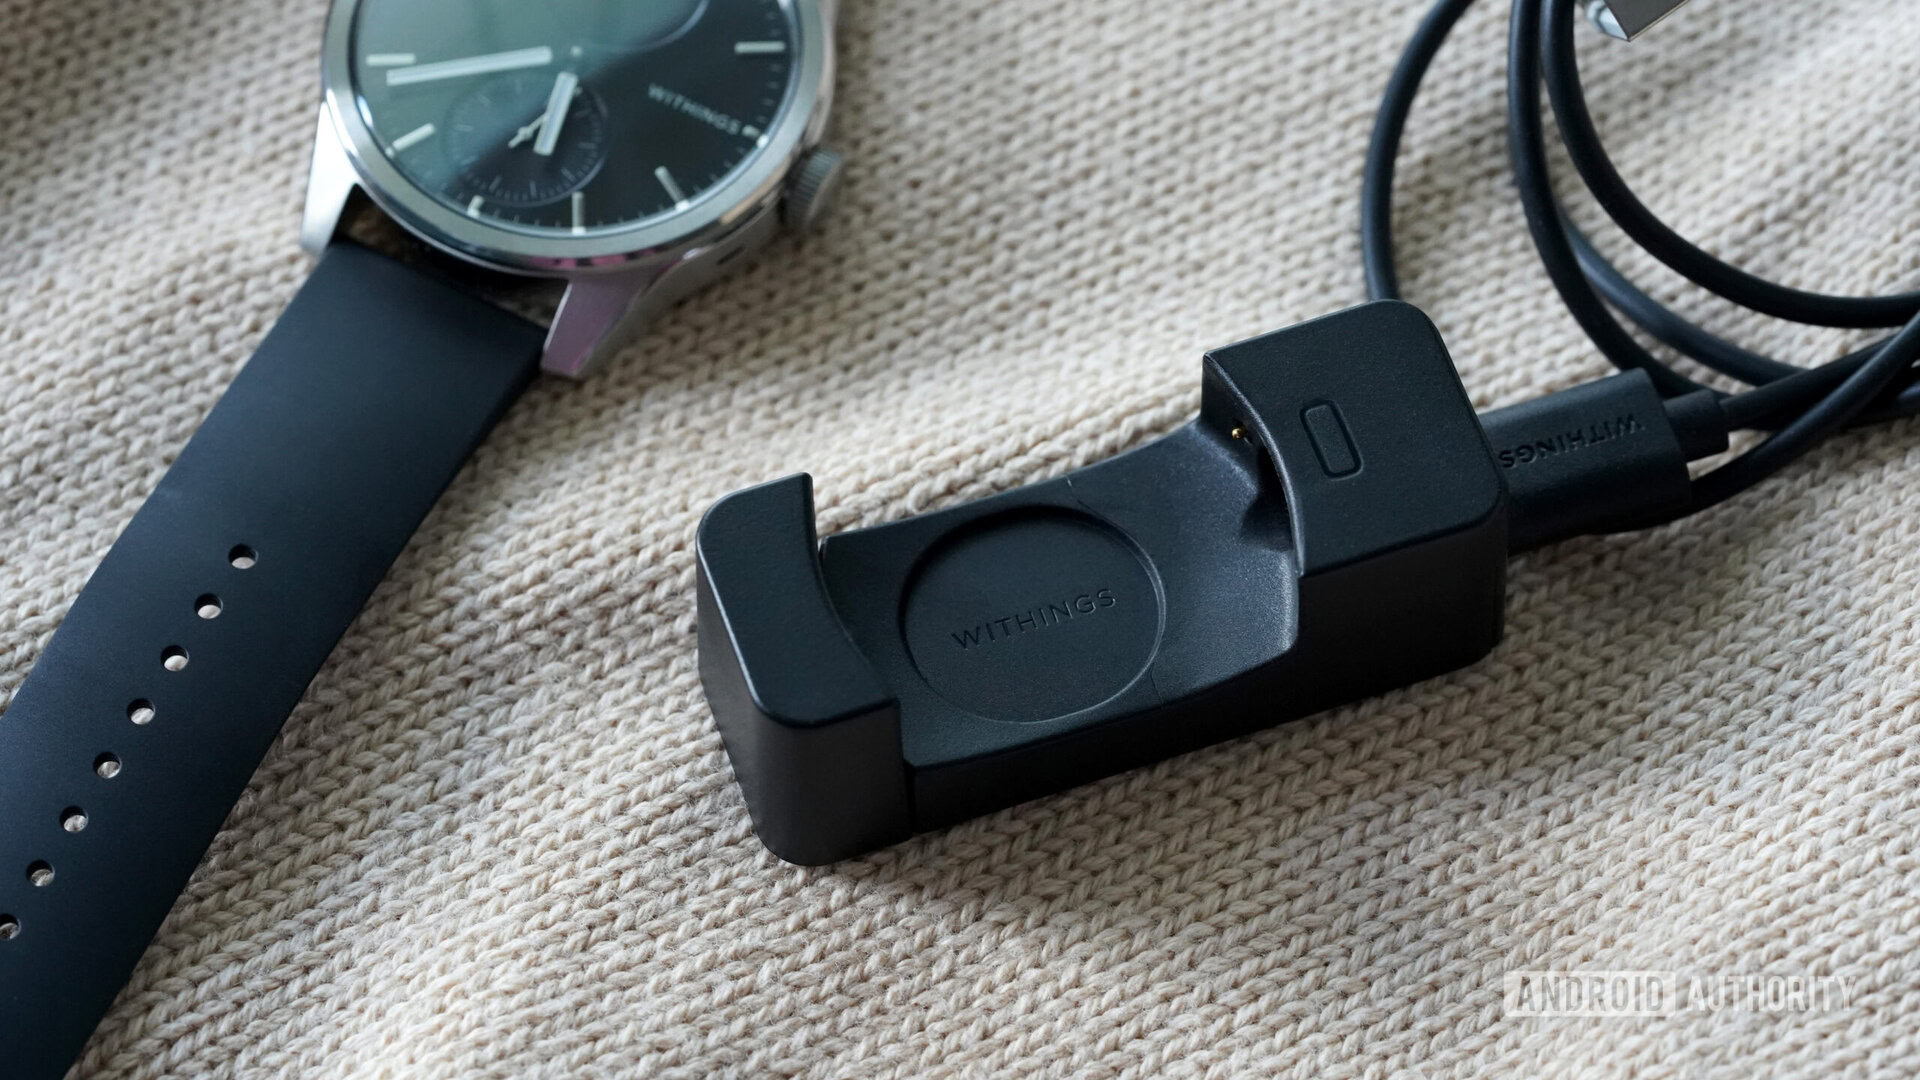 A Withings ScanWatch 2 charger rests along side the device.